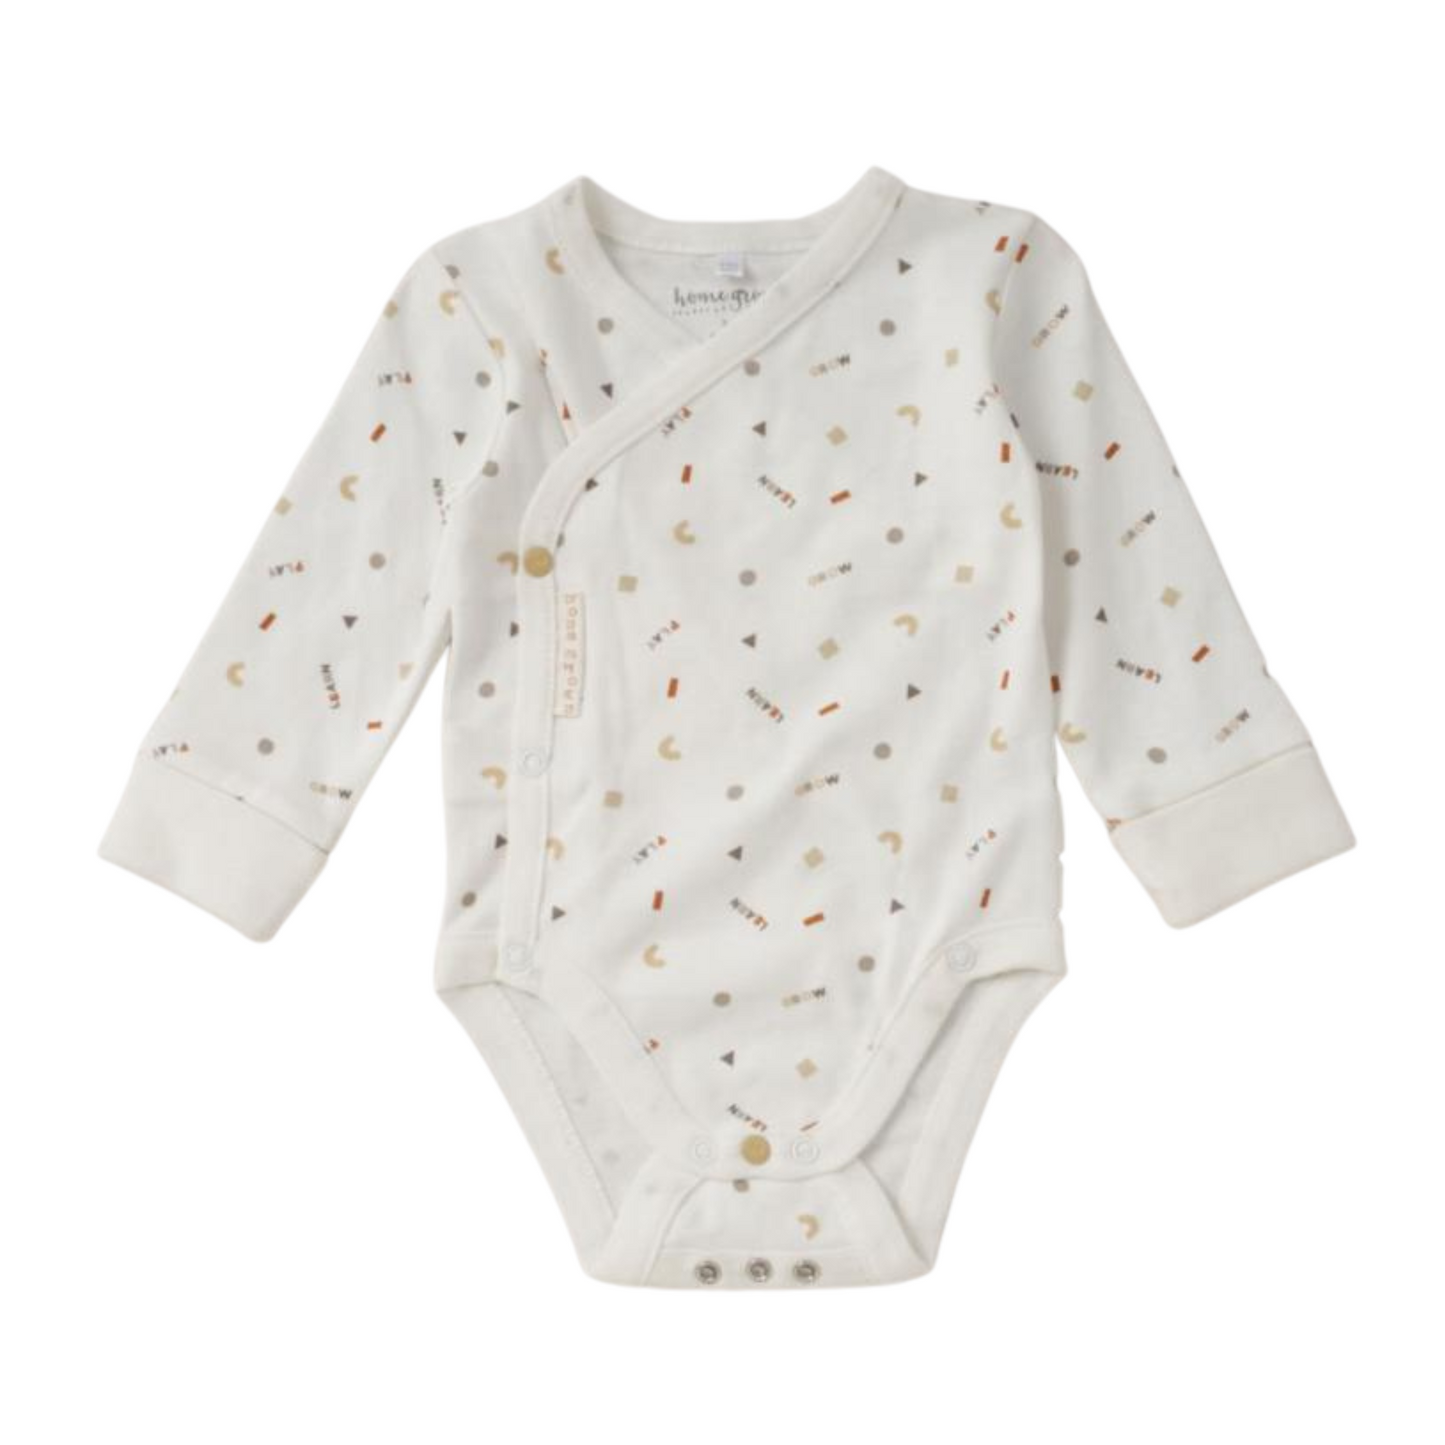 Image of a three-piece organic baby clothes set, including a long-sleeved bodysuit, ribbed trousers and an adorable bib, made from soft organic cotton